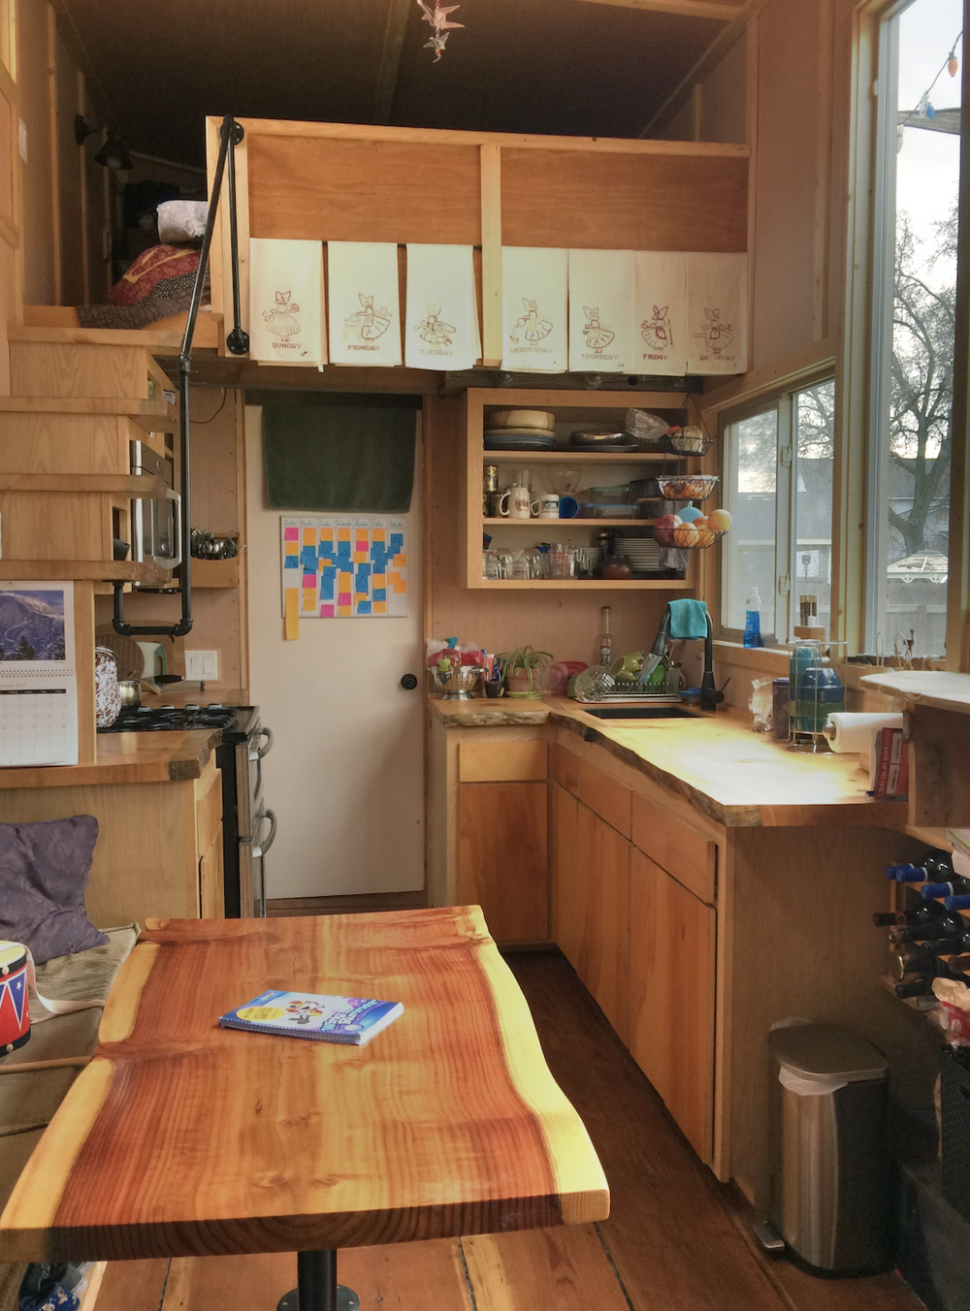 Photos of Tiny-House Kitchens Show How Creative Homeowners Can Be - tiny home ideas